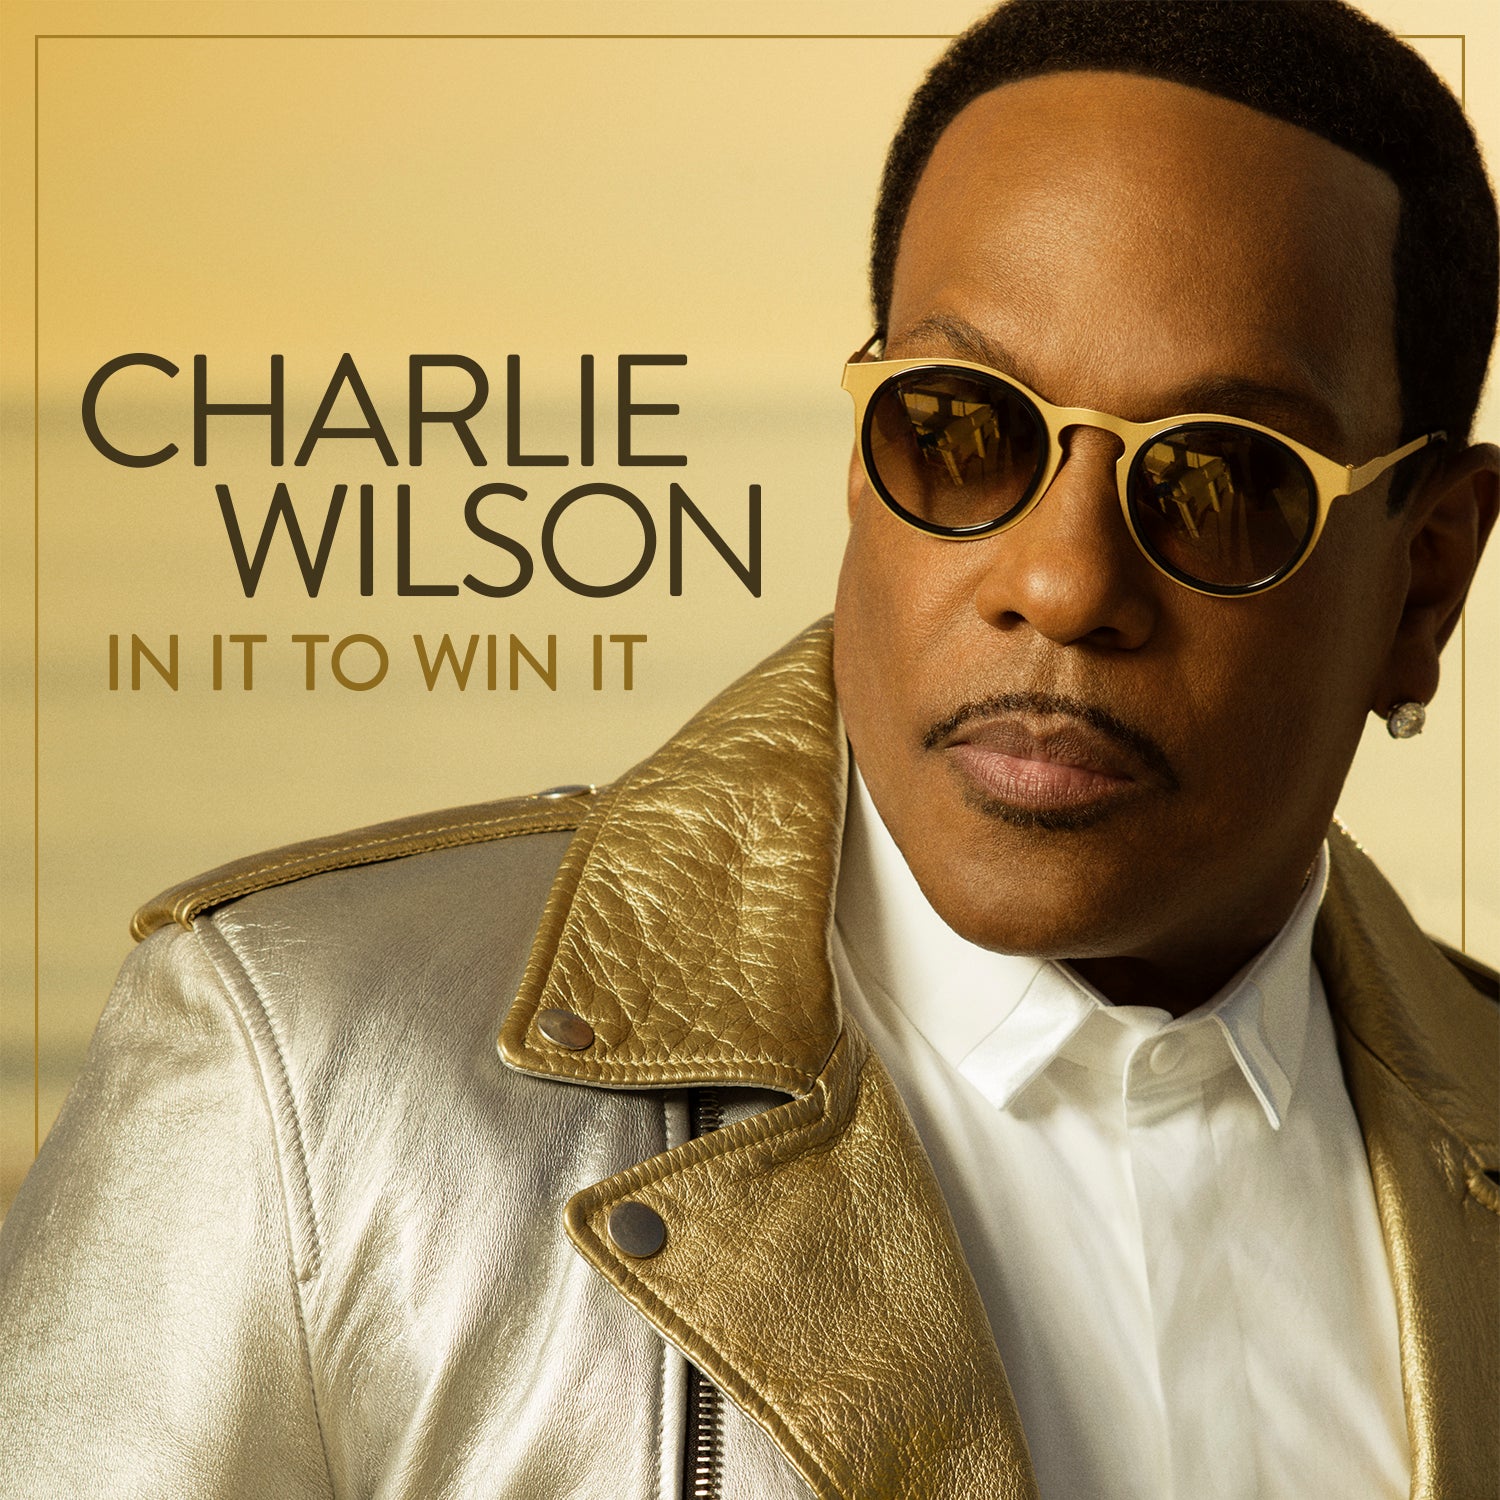 Exclusive Premiere: Charlie Wilson Kicks Off 2017 With New Music That'll Give You 'Chills'
